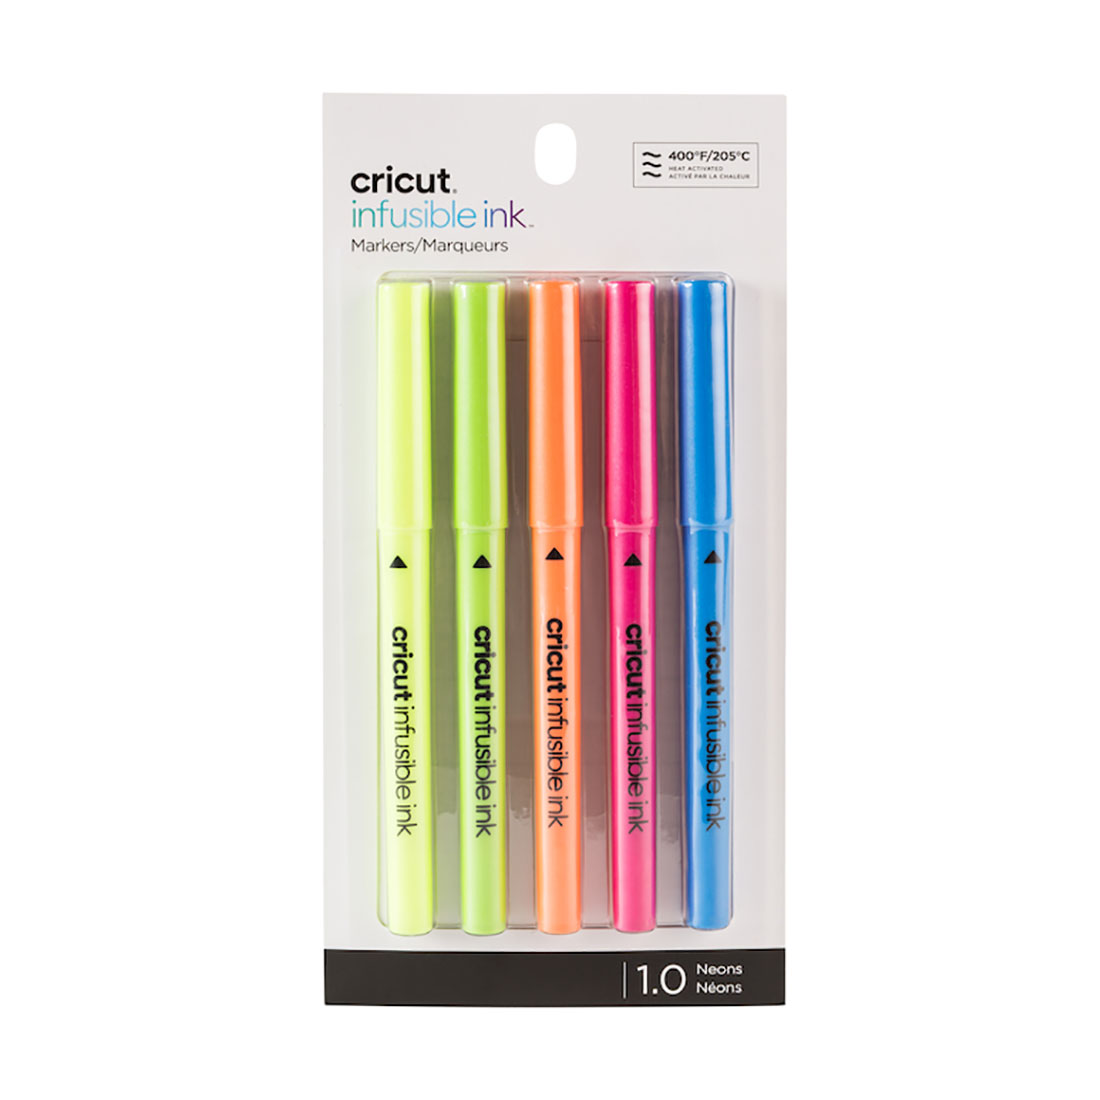 Cricut Joy Infusible Ink Markers 1.0 (3) Black, Red, Green (SB1082744)